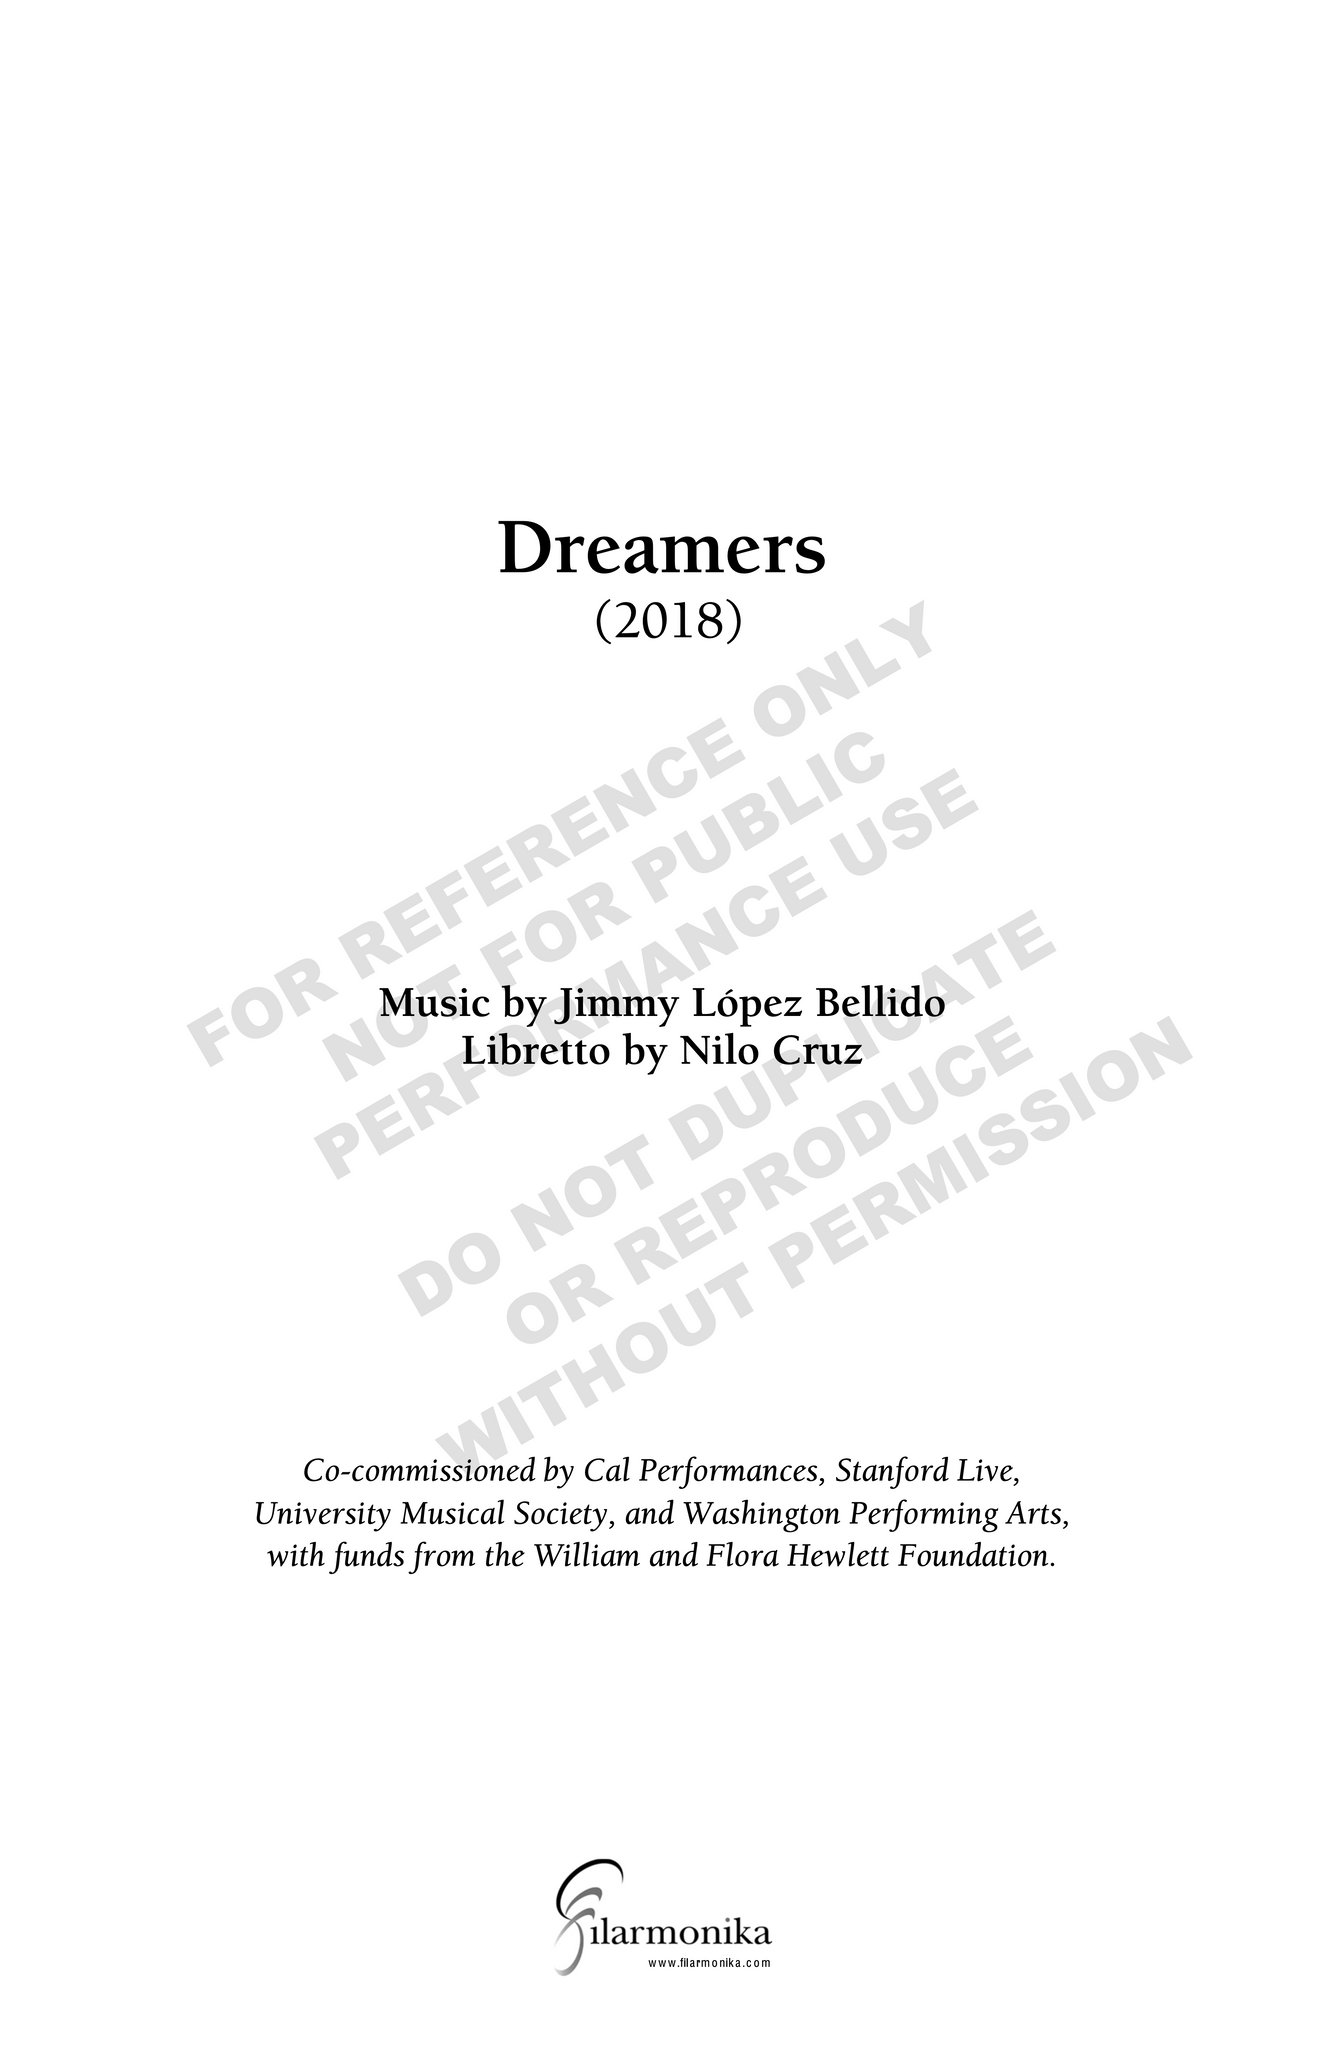 Dreamers, an oratorio for soprano, mixed chorus and orchestra